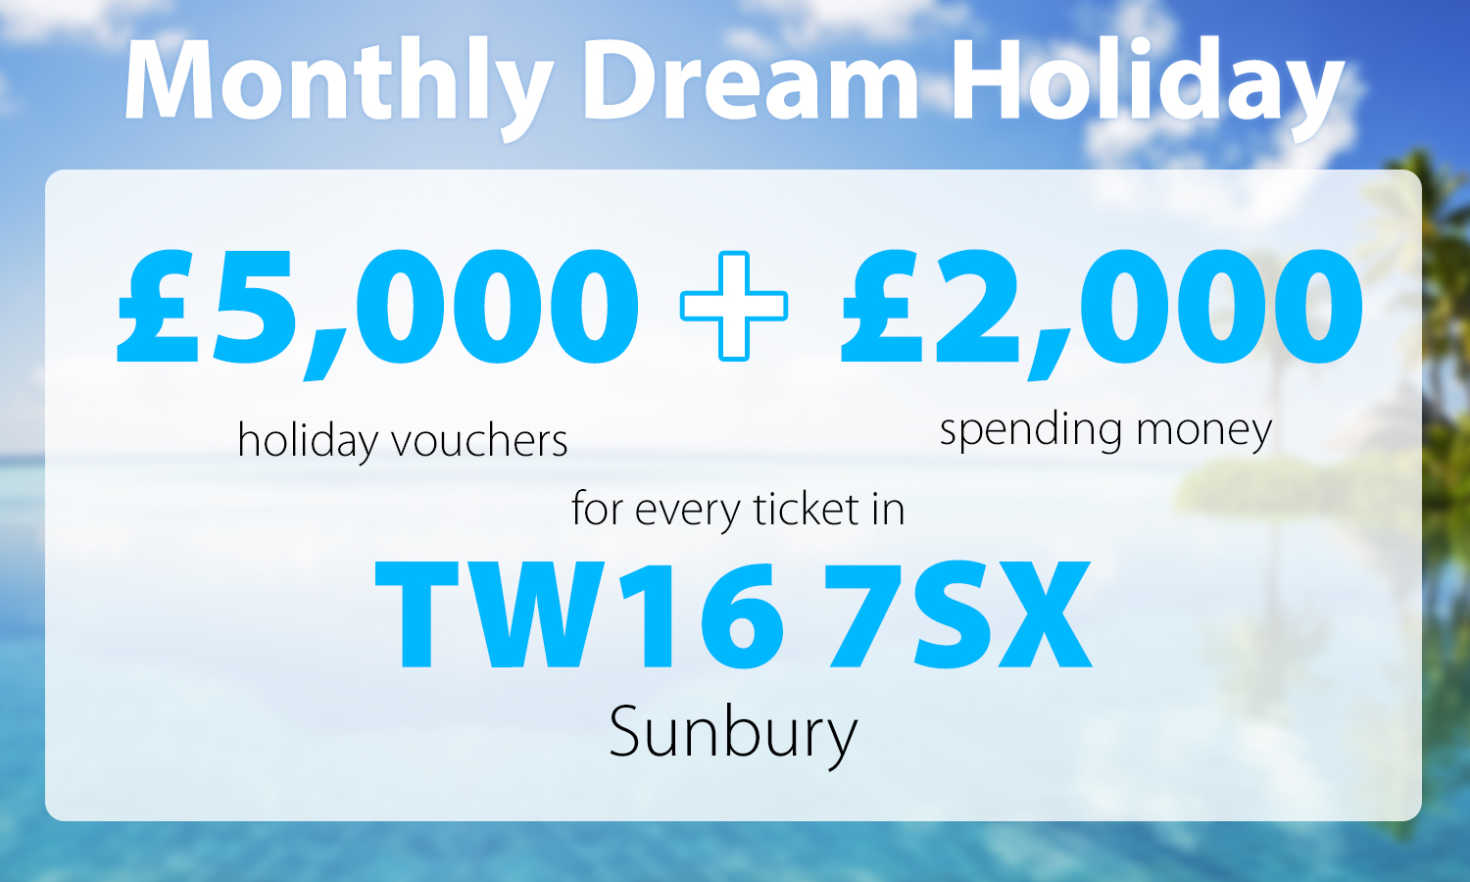 One lucky Sunbury winner is in for a treat after scooping this month's Dream Holiday prize